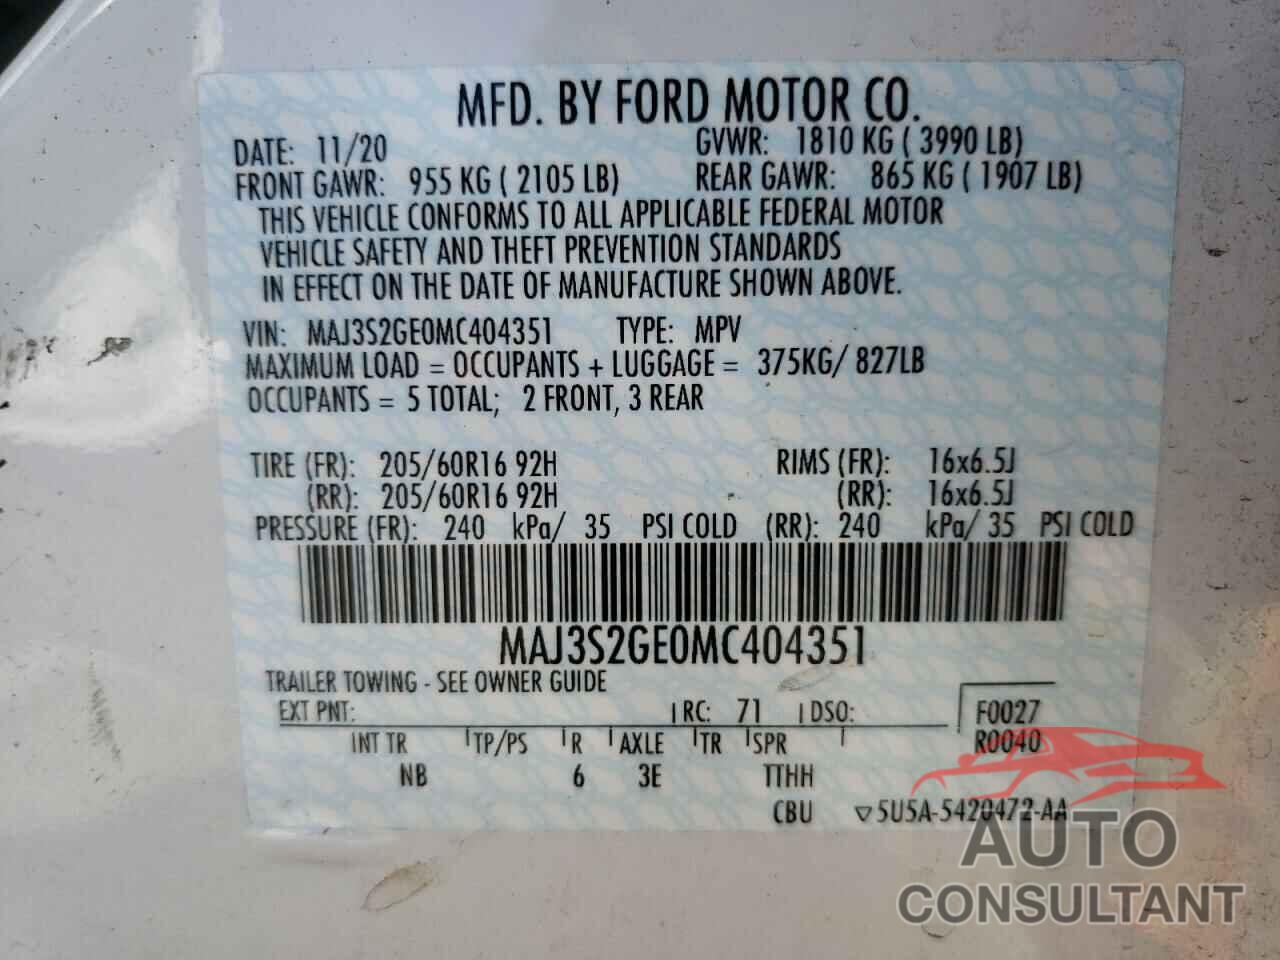 FORD ALL OTHER 2021 - MAJ3S2GE0MC404351